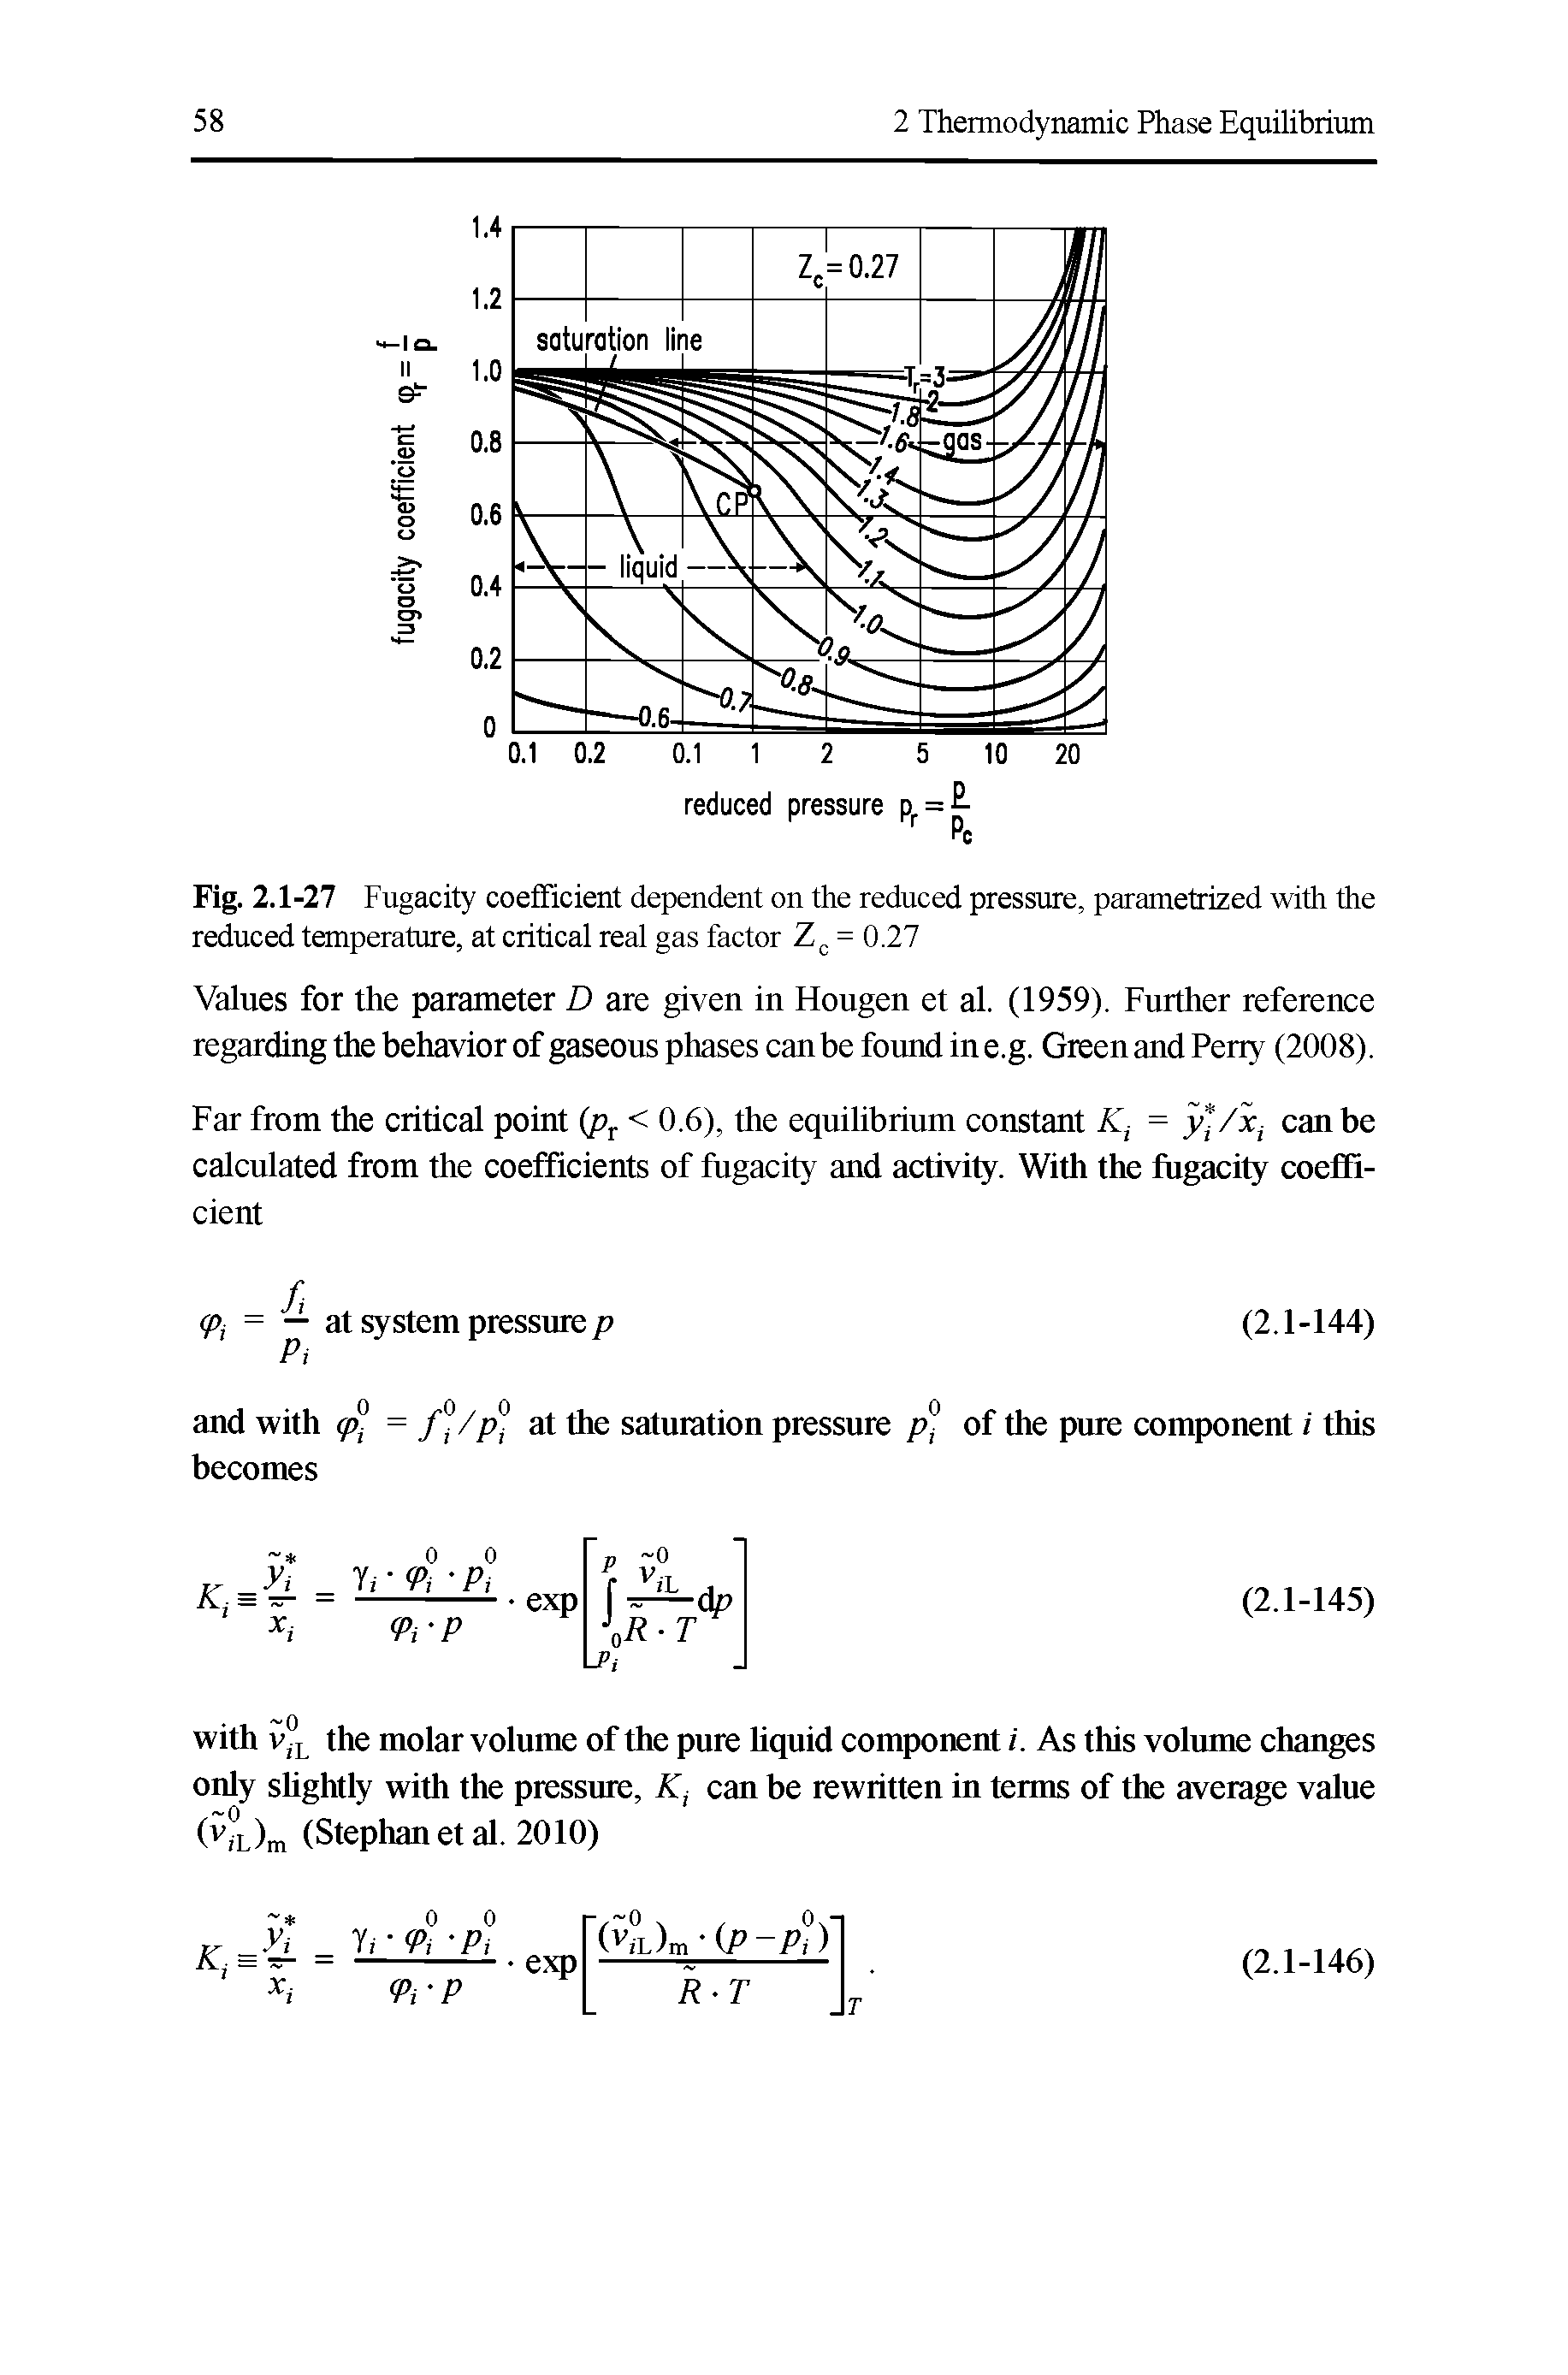 Fig. 2.1-27 Fugacity coefficient dependent on the reduced pressure, parametrized with the reduced temperature, at critical real gas factor Z, = 0.27...